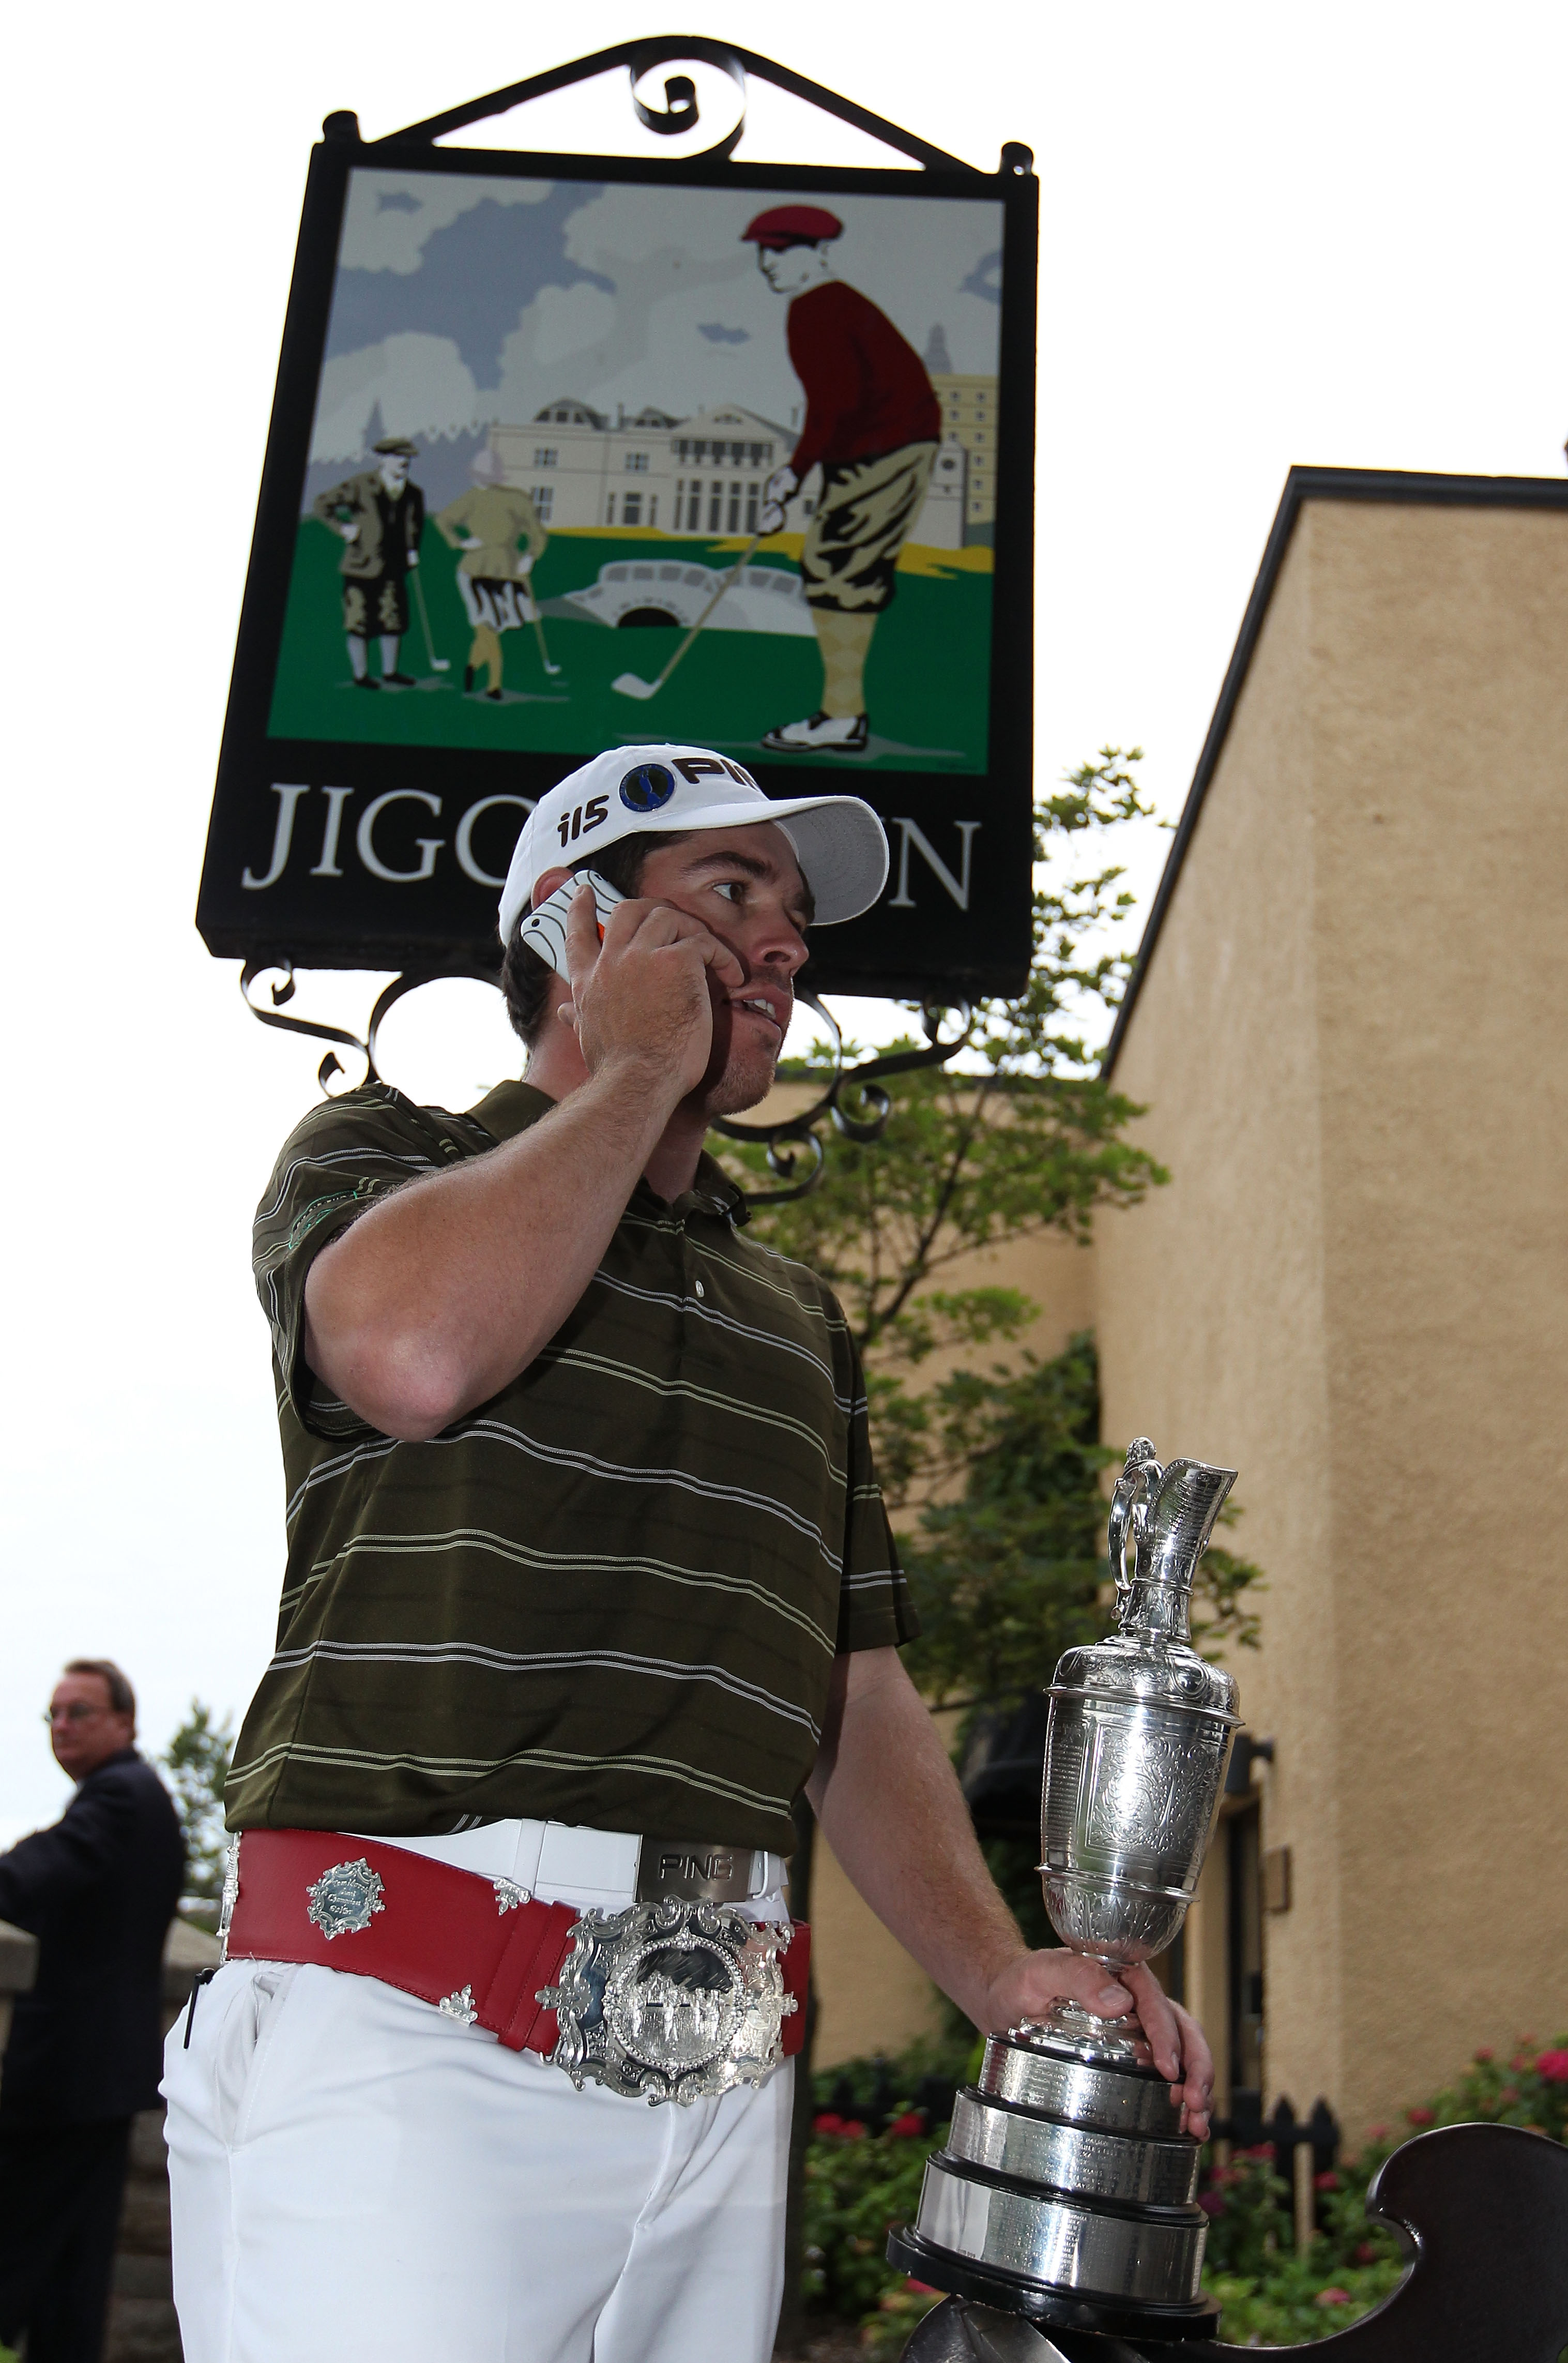 ST ANDREWS, SCOTLAND - JULY 18:  Louis Oosthuizen of South Africa chats on a mobile phone outside the Jigger Inn on the Old Course, St Andrews on July 18, 2010 in St Andrews, Scotland.  (Photo by Ross Kinnaird/Getty Images)